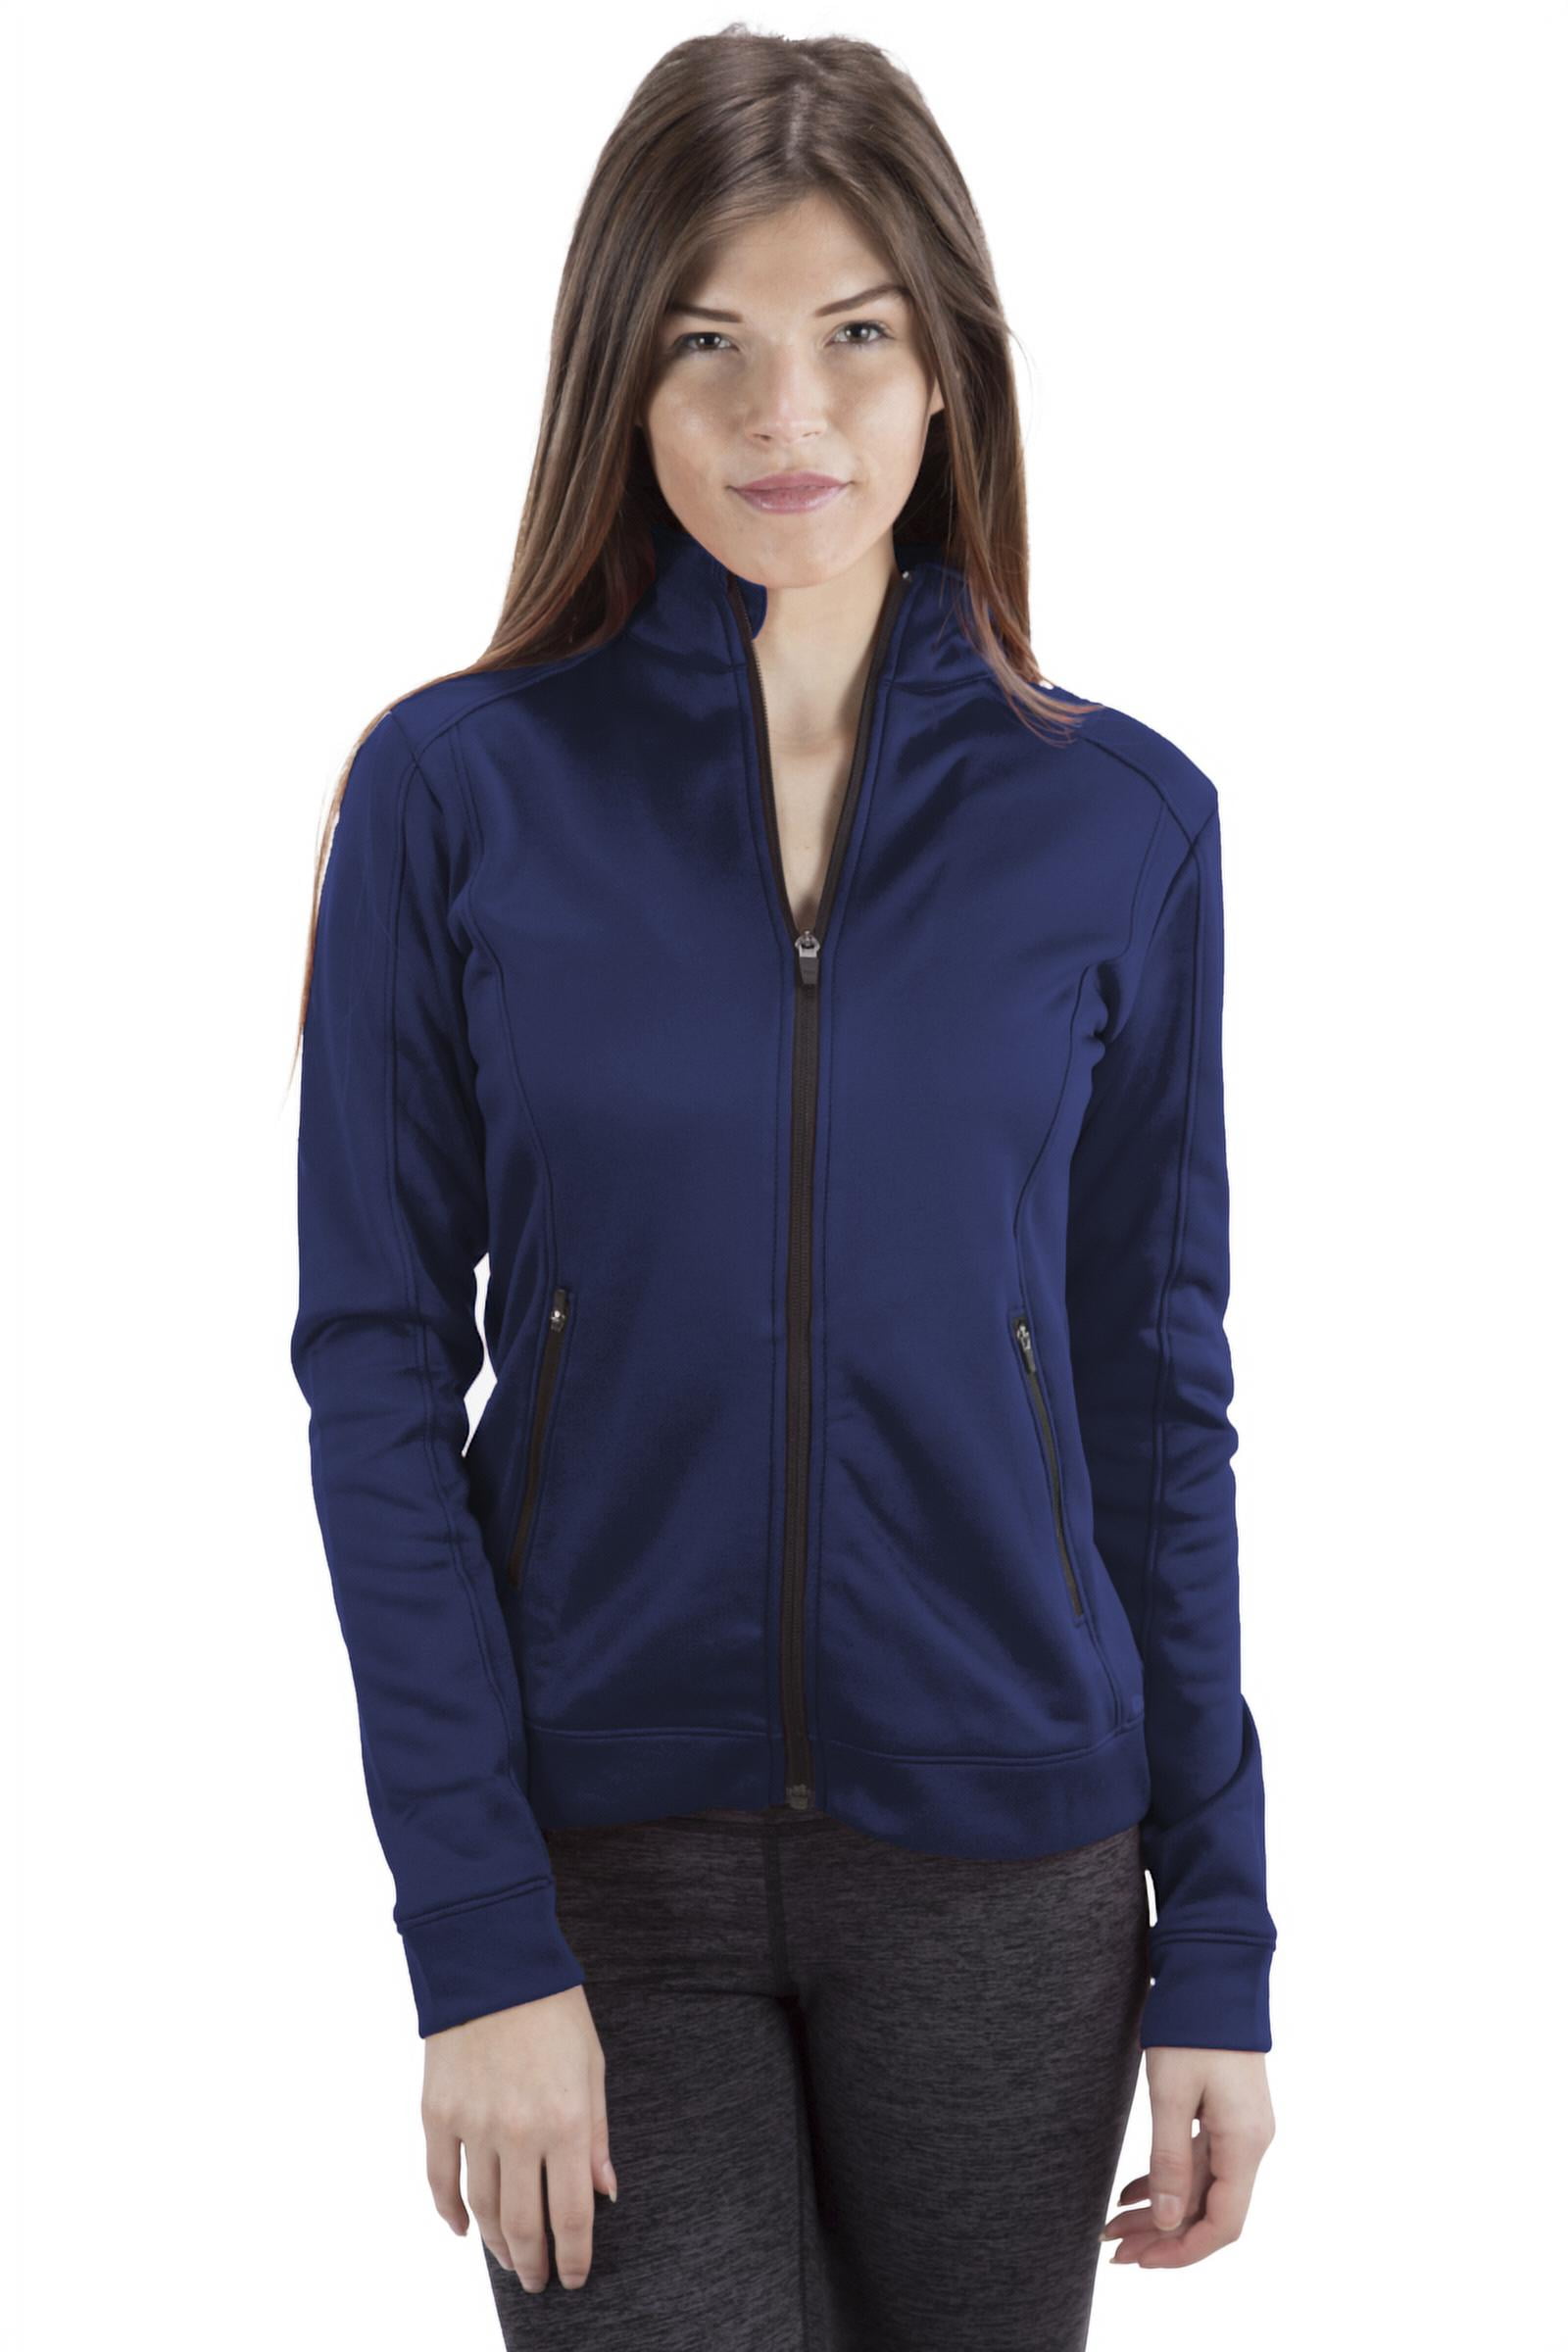 Covalent Activewear Full Zip Stream Hoody with Moisture Wicking Fleece and  Zippered Side Pockets 